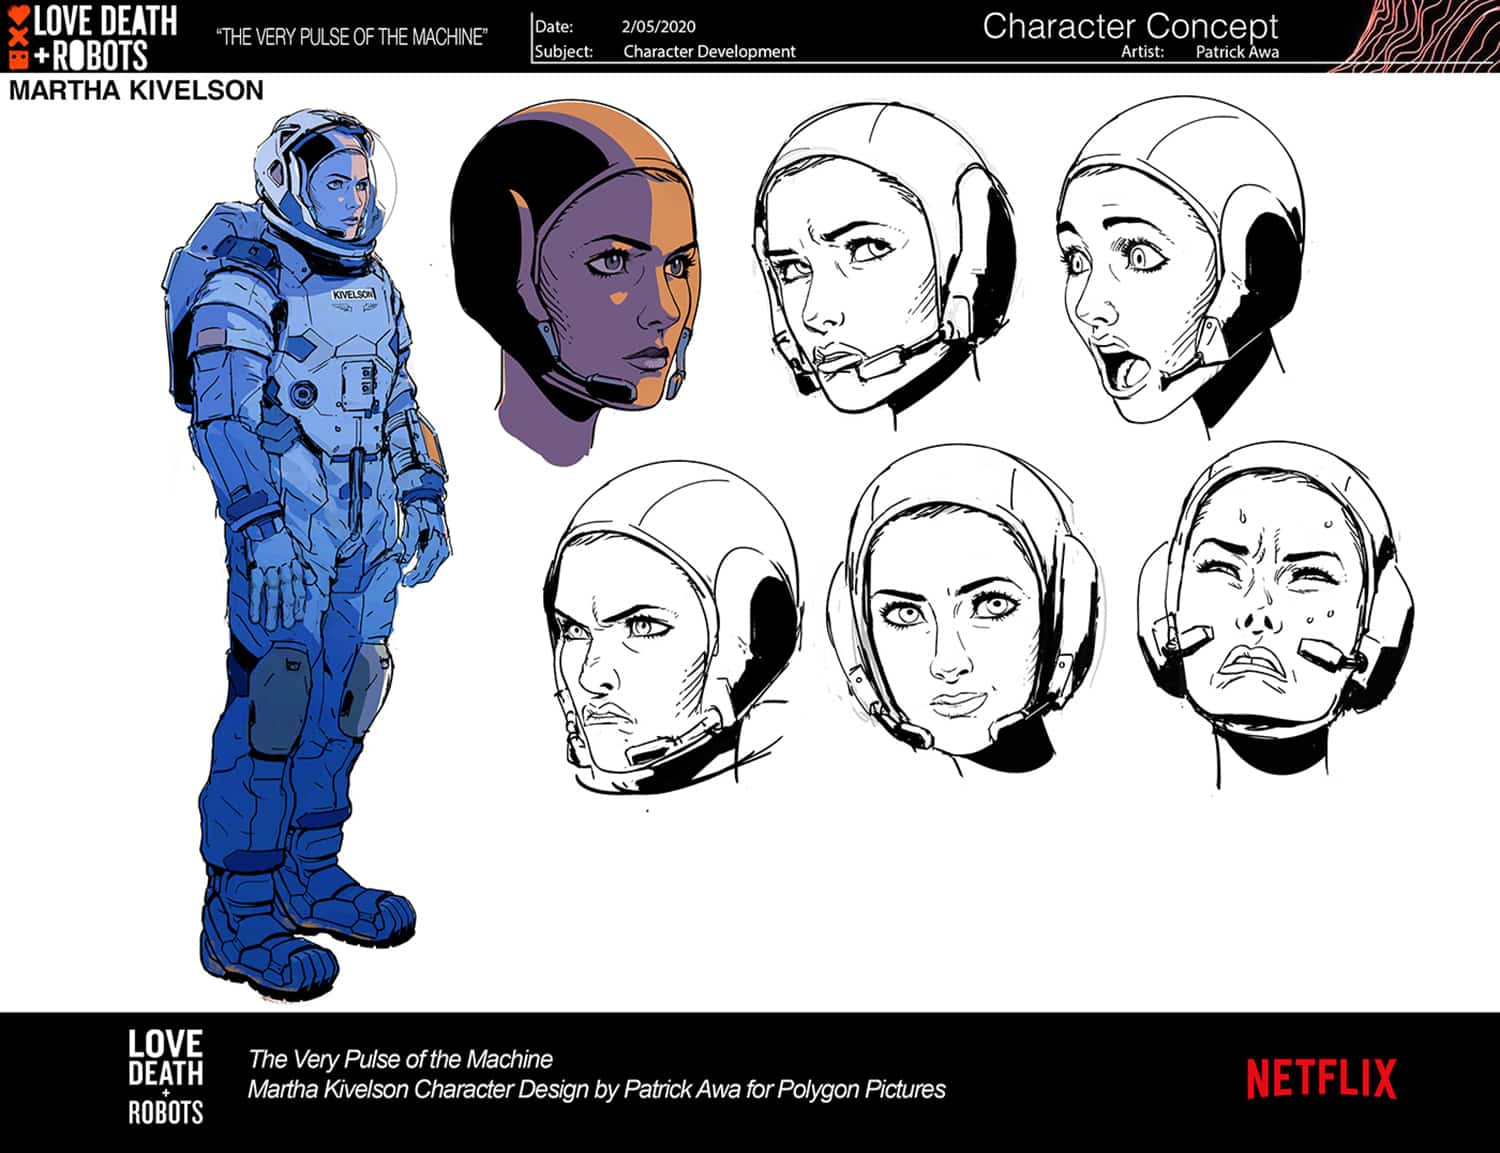 Character reference sheet of the astronaut. Full body colored image to the left, with six drawings of her face in various expressions.